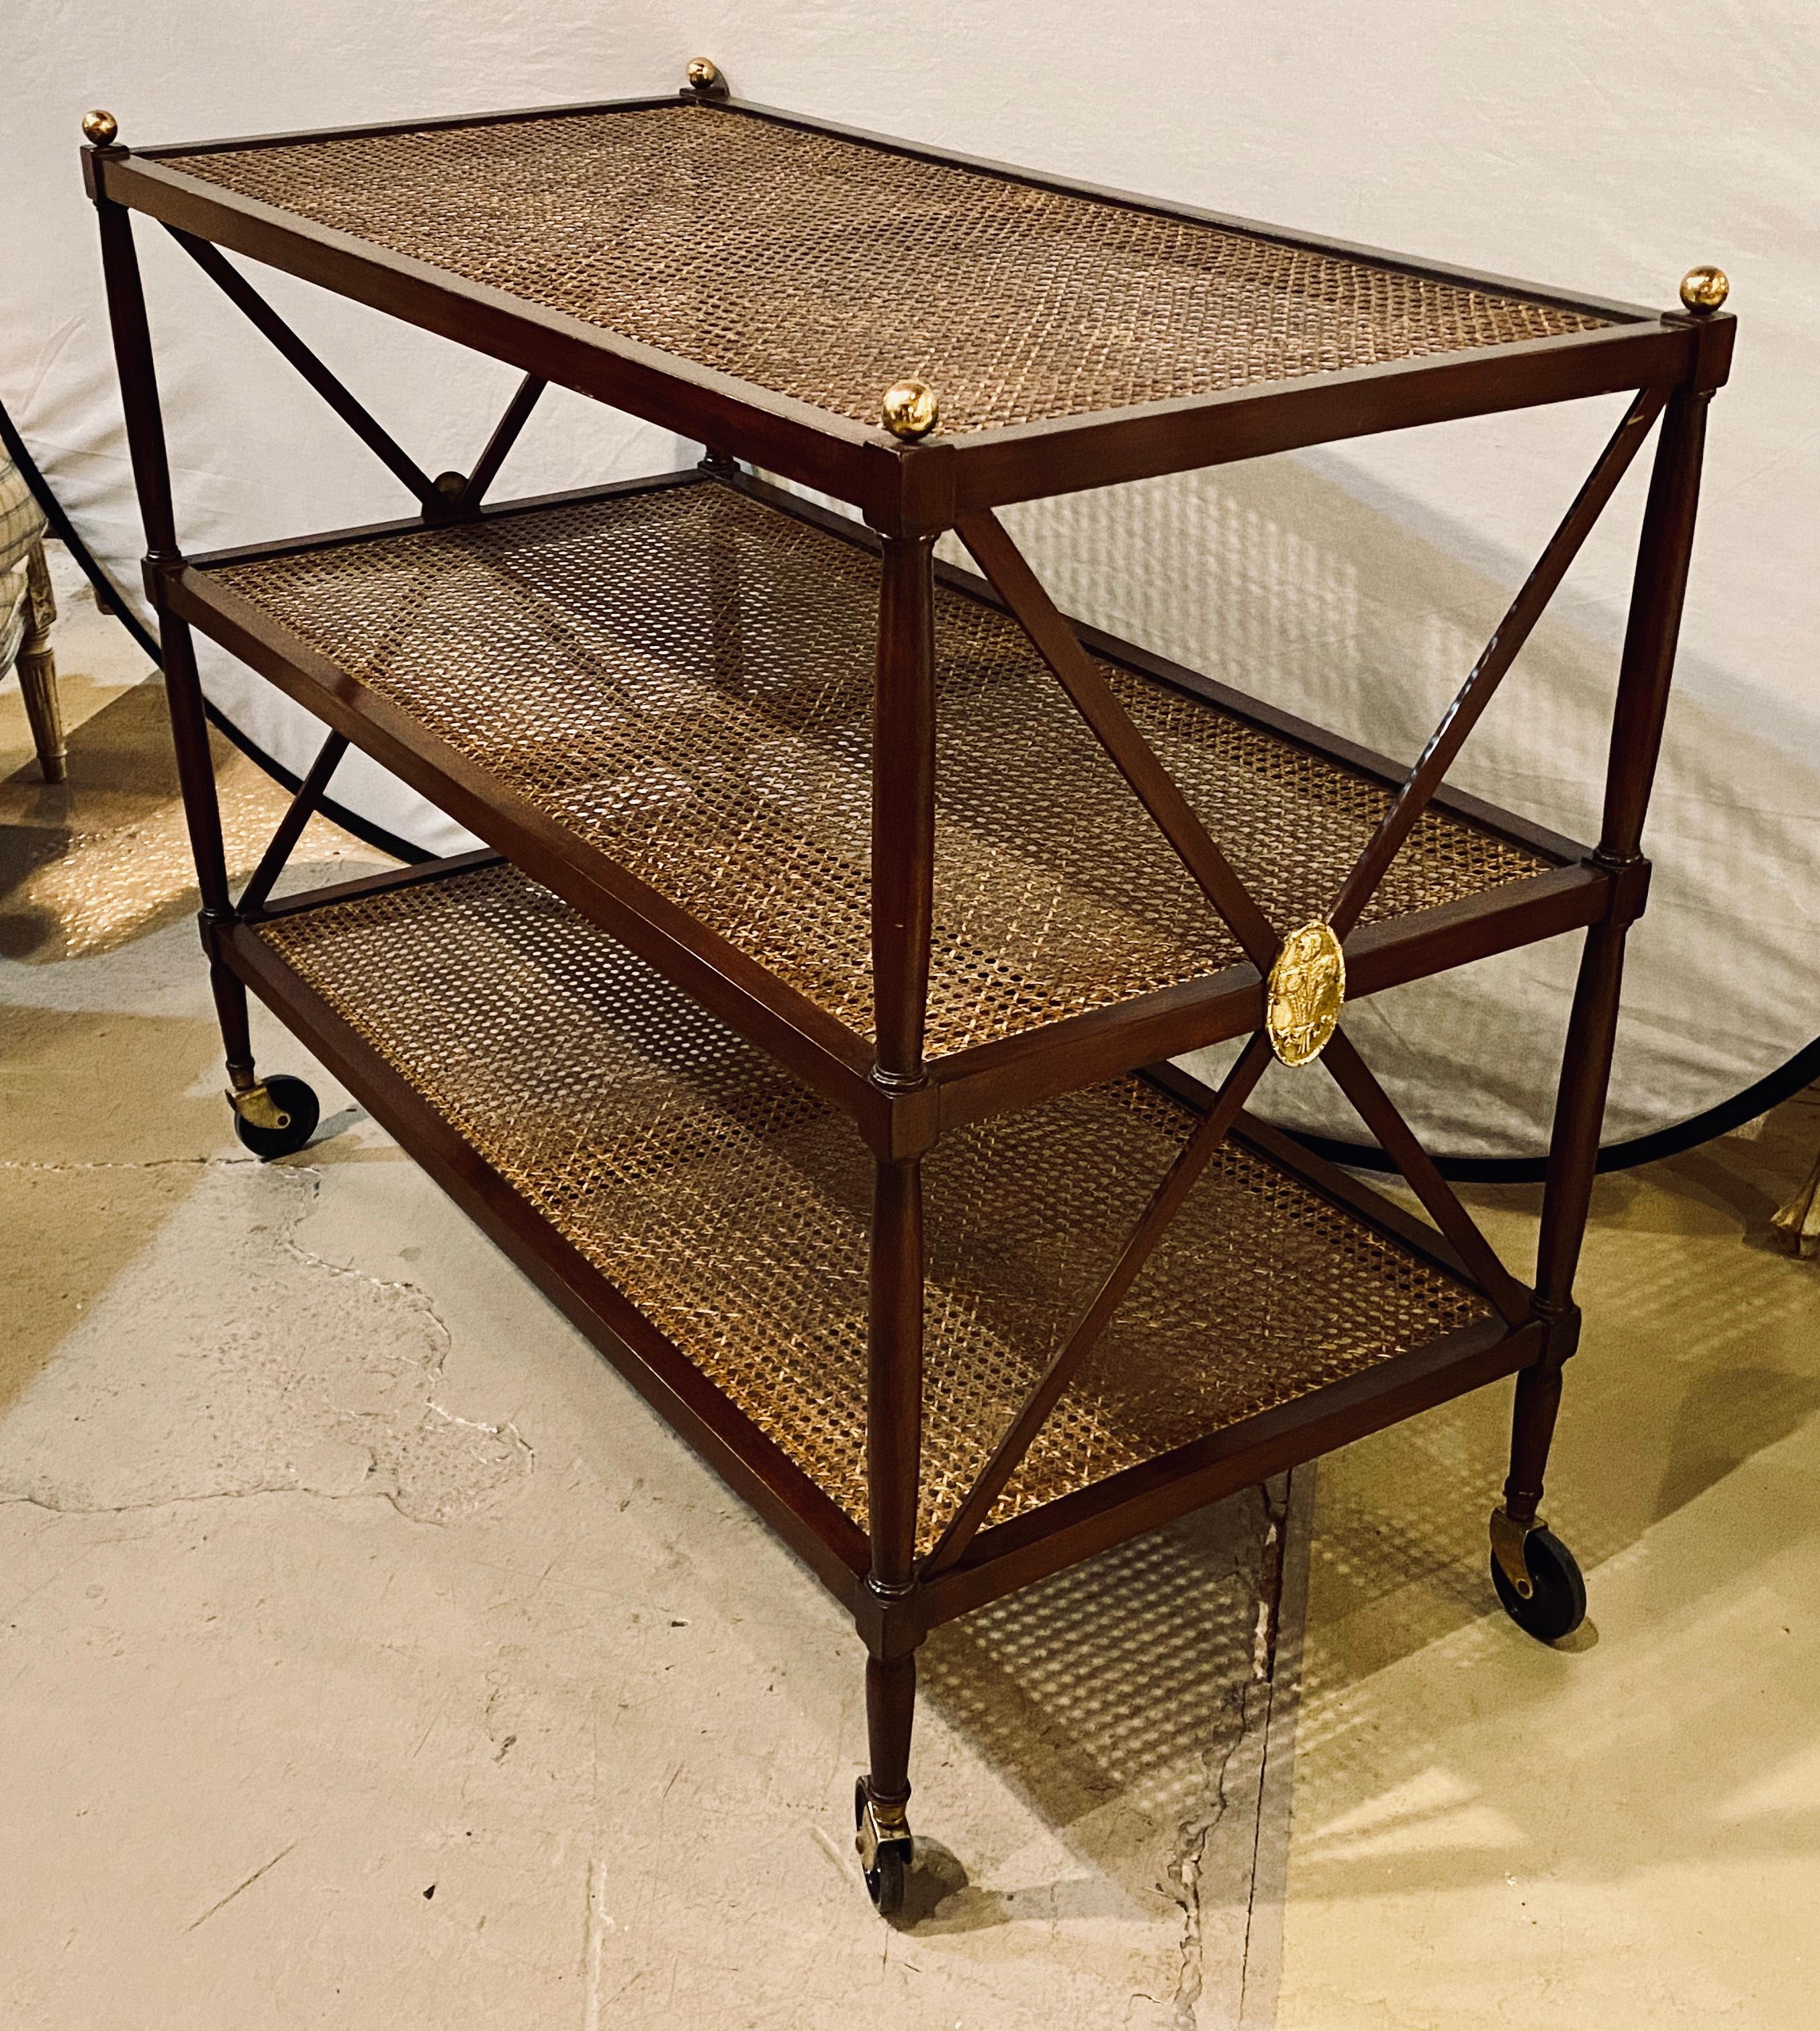 Hollywood Regency three-tier server in the manner of Jansen. This large and impressive serving wagon has full turning smoothly moving casters supporting its mahogany and cane frame with X form design and bronze applicates.
Ehh.